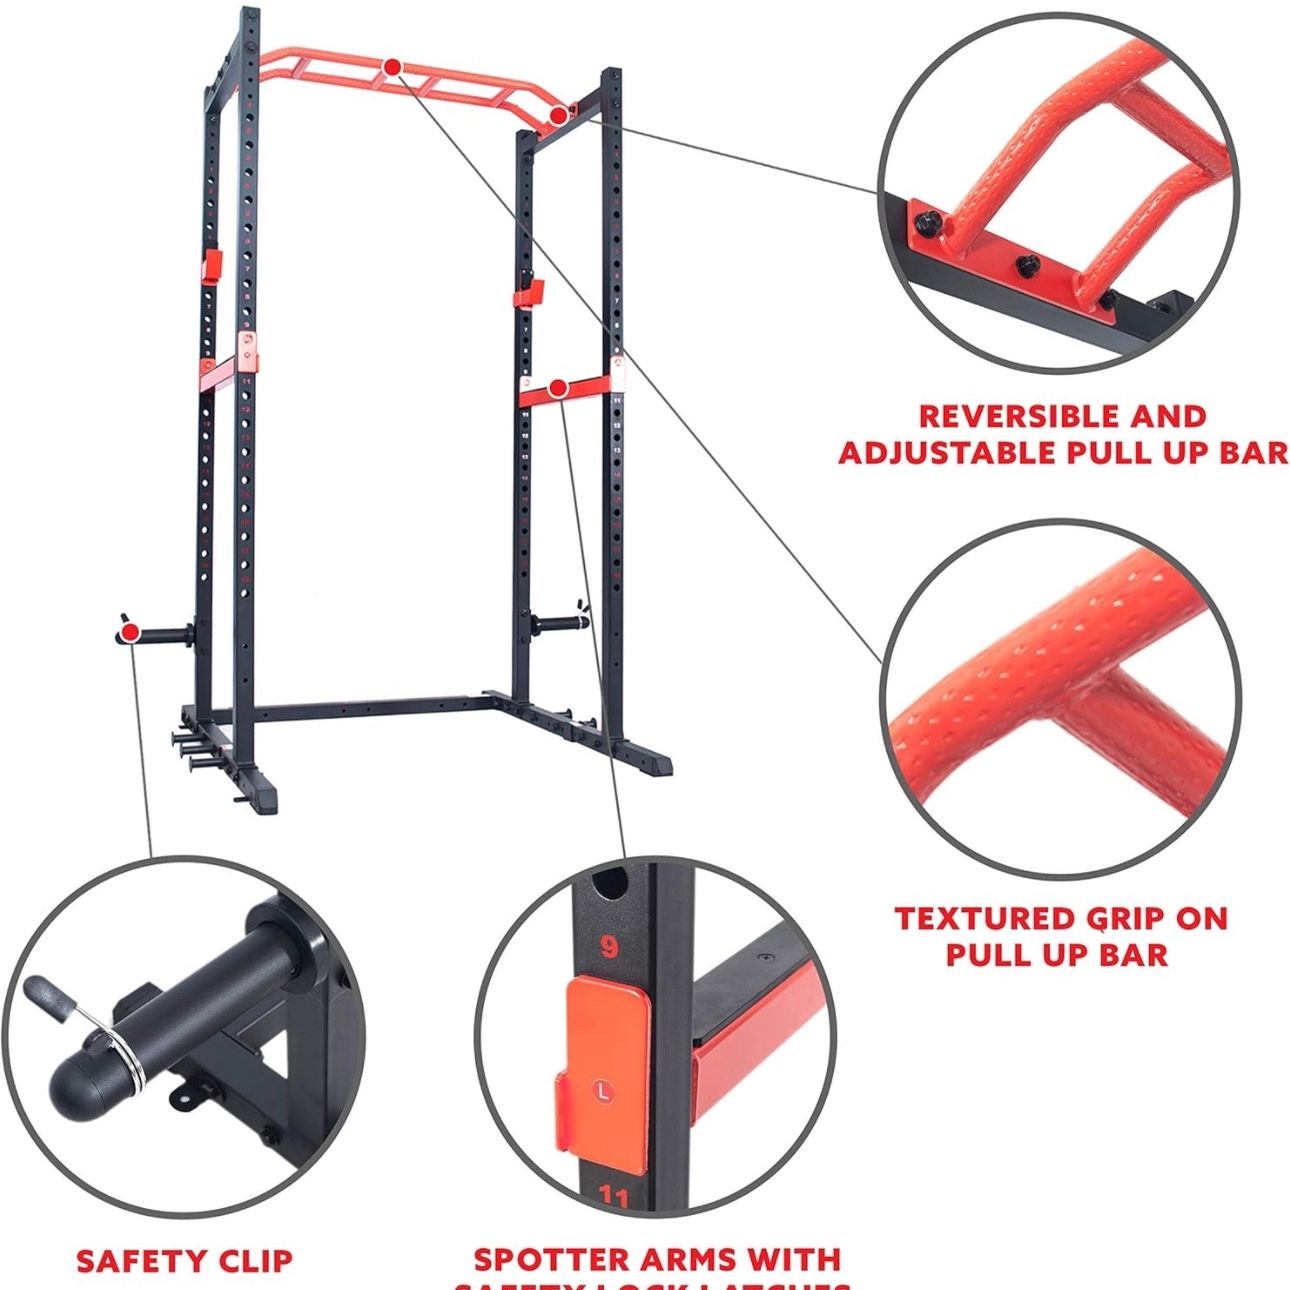 Sunny Health & Fitness Squat Stand Power Rack for Weightlifting - Multifunction Bench Press Squat Rack with Adjustable Pull Up Bar for Home Gym